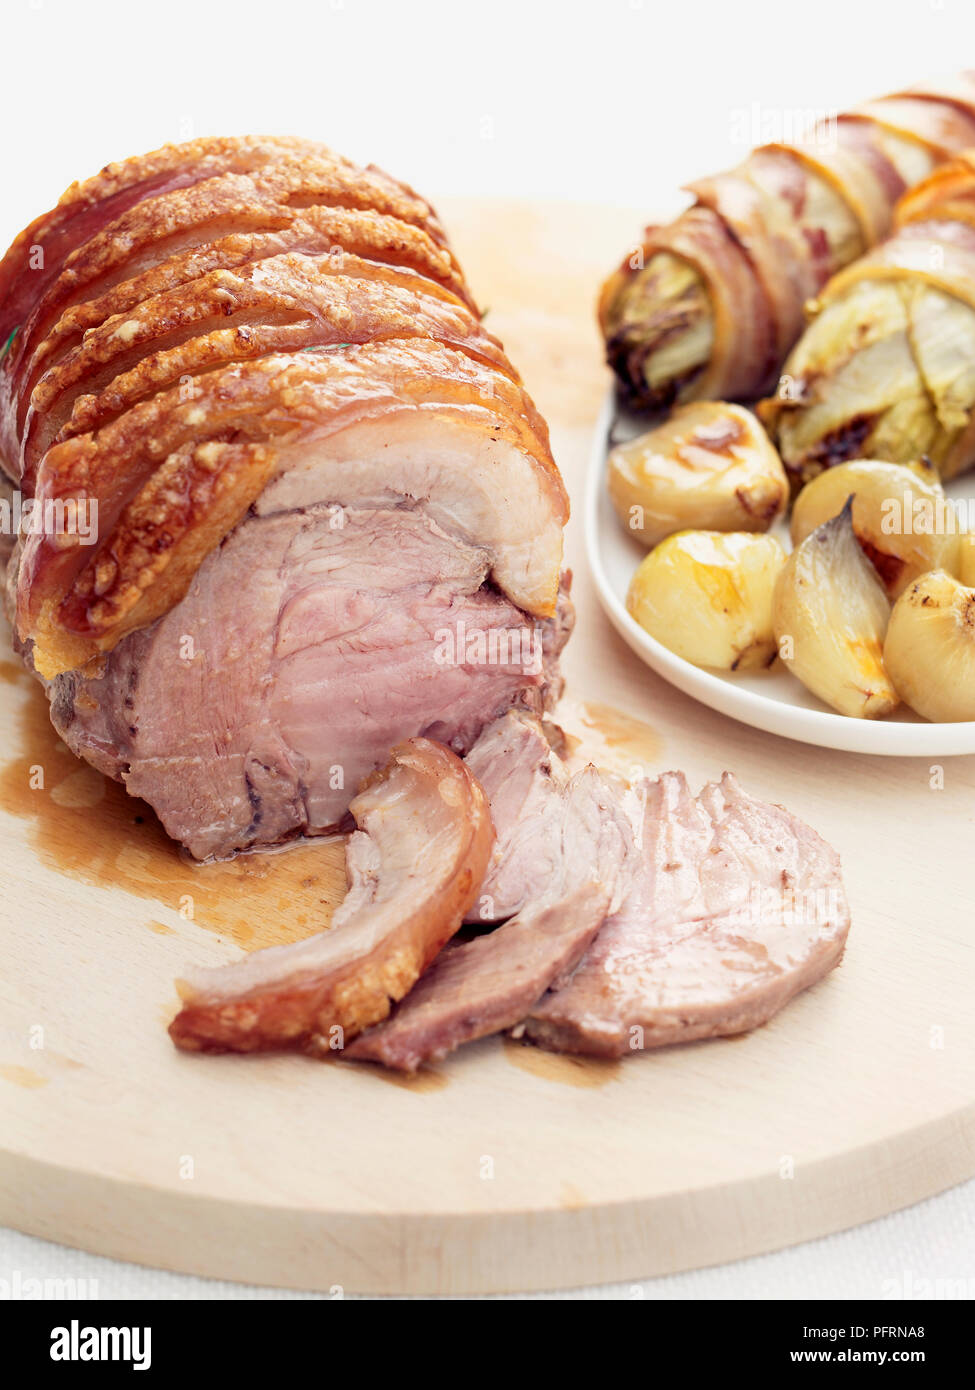 Roast pork wrapped in bacon, with chicory and onions on wooden chopping board and white plate Stock Photo